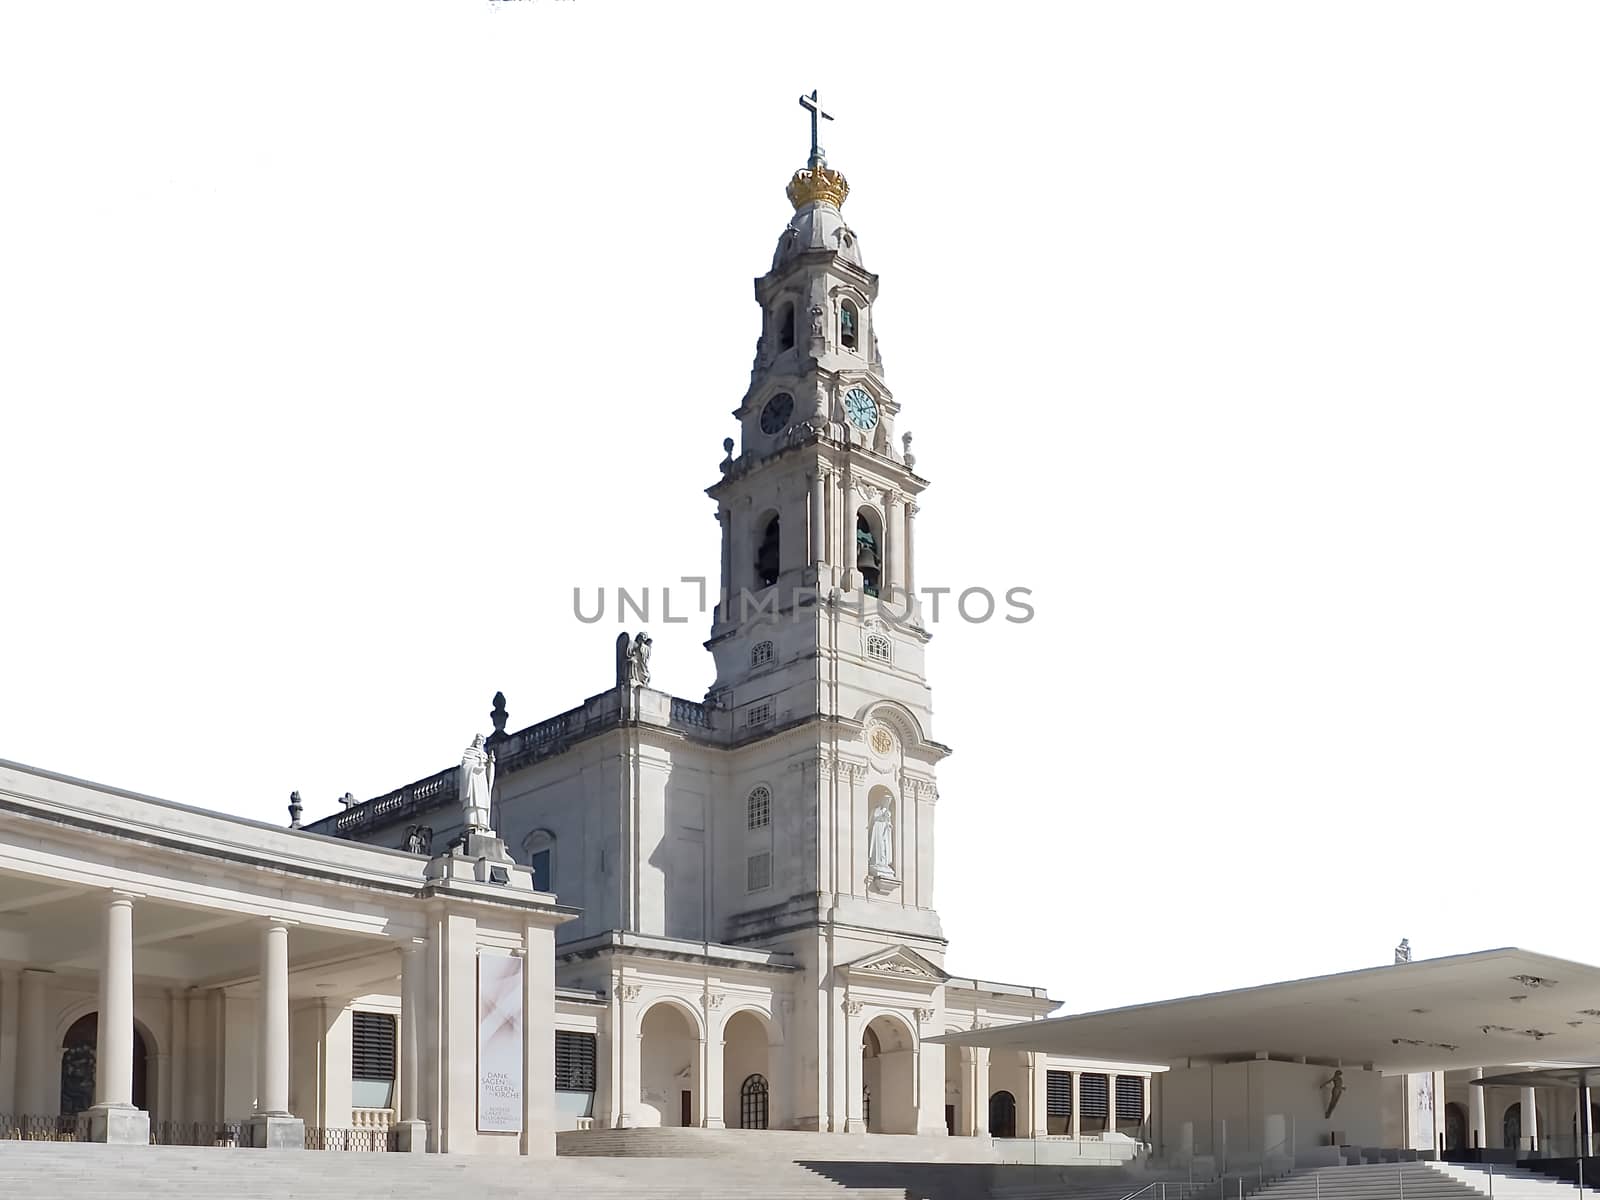 Cathedral of Fatima in Portugal near Lisboa with blue sky by Stimmungsbilder